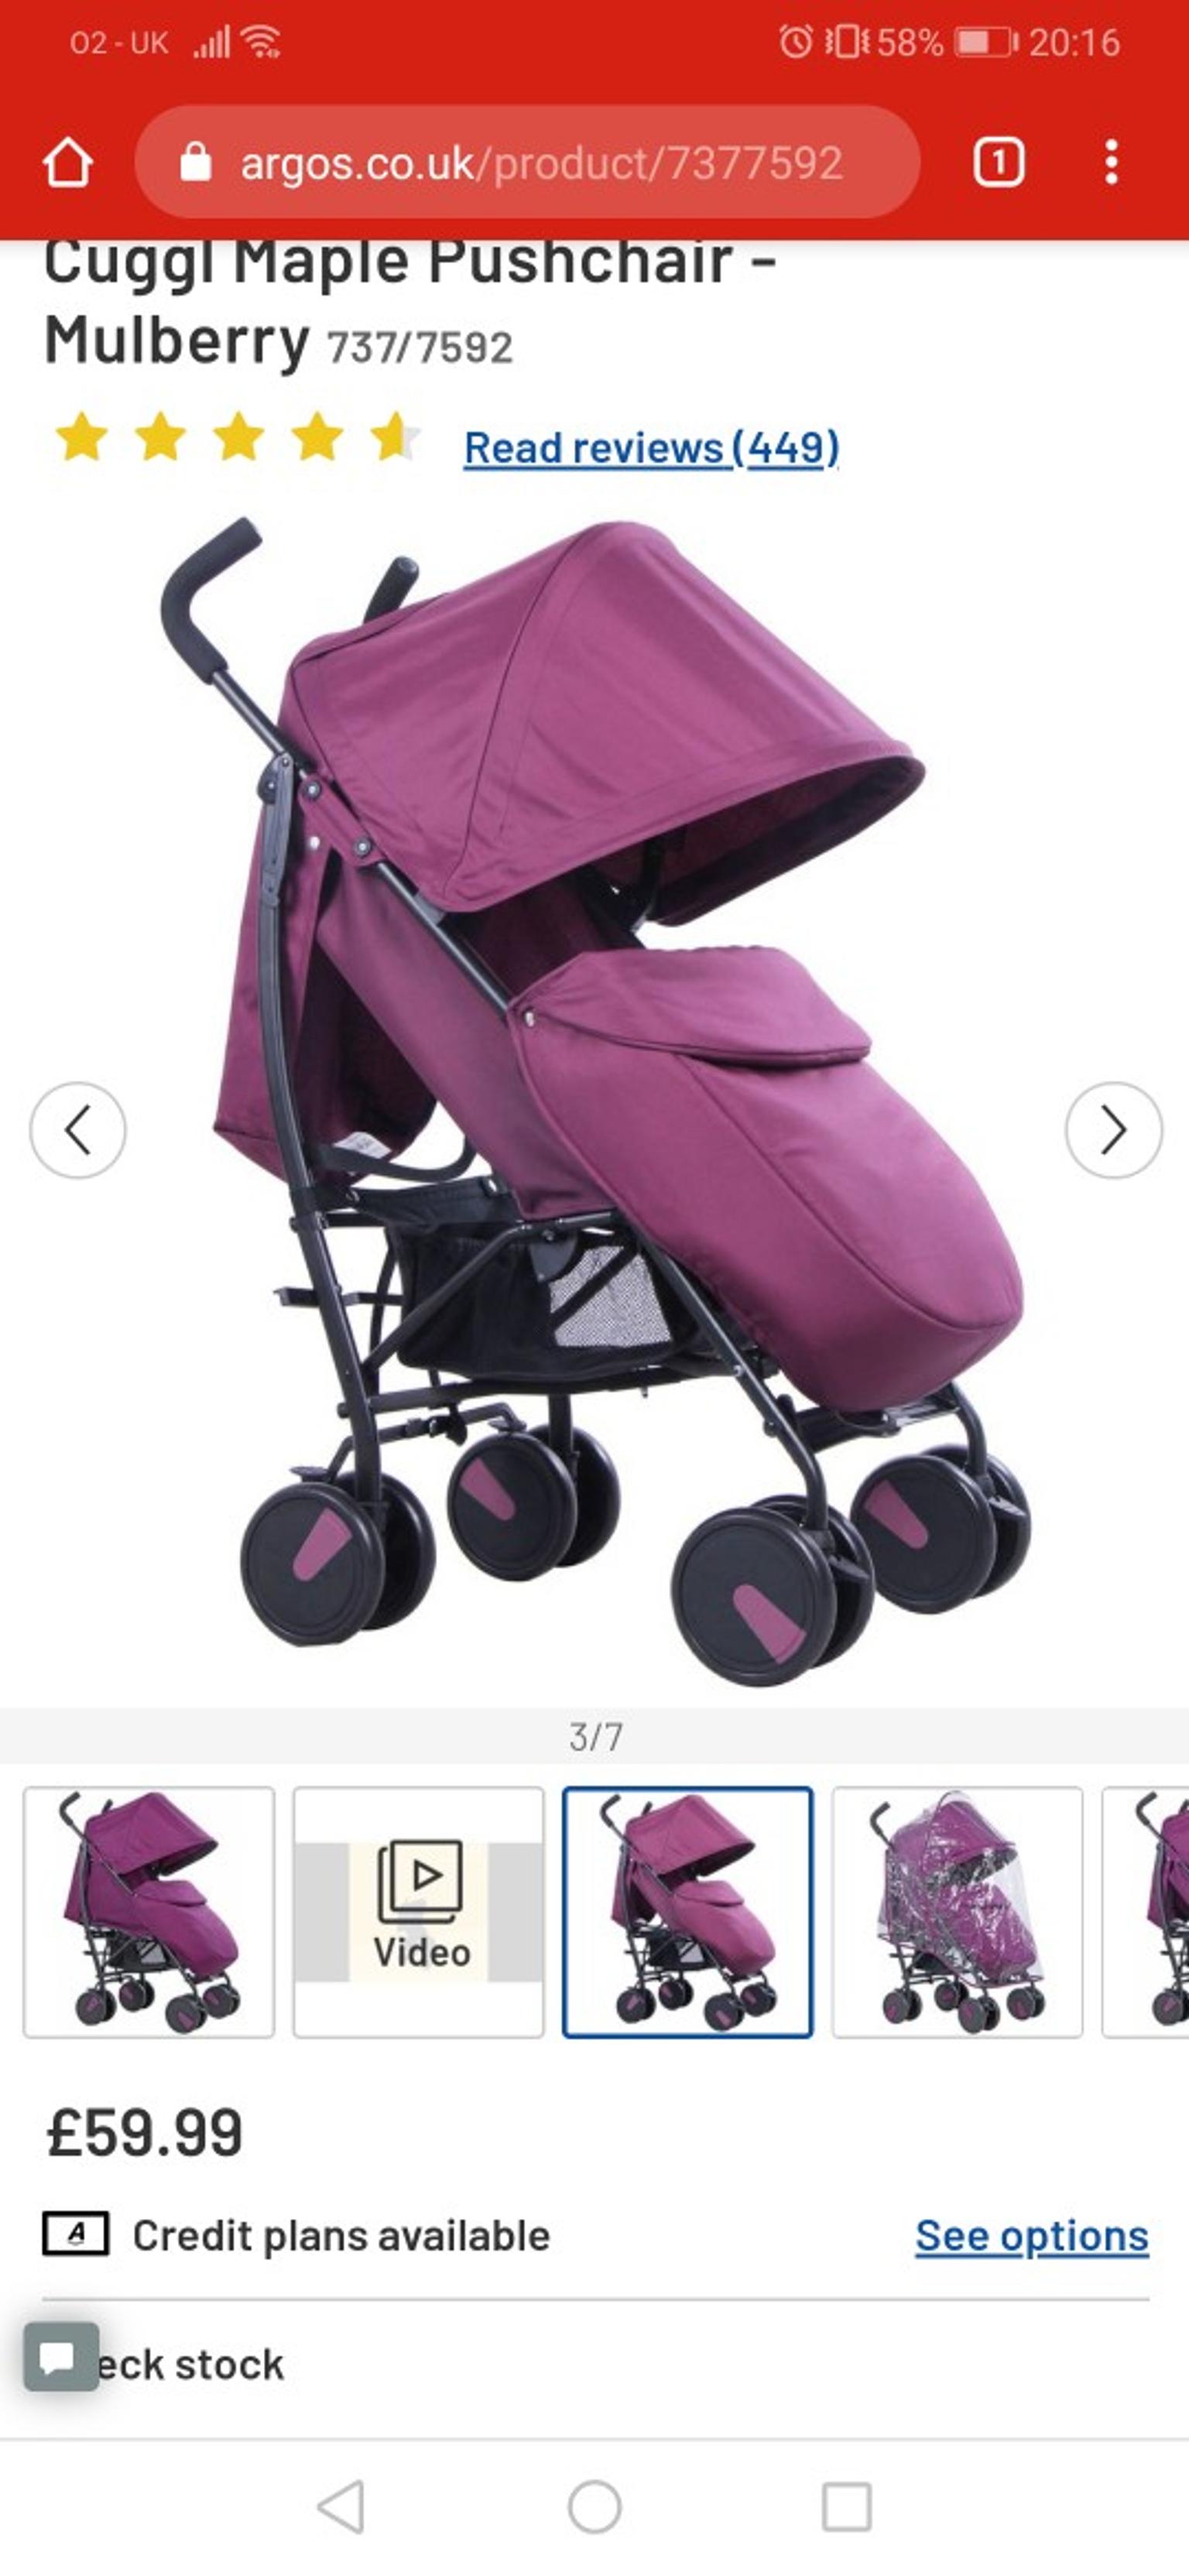 cuggl maple pushchair review